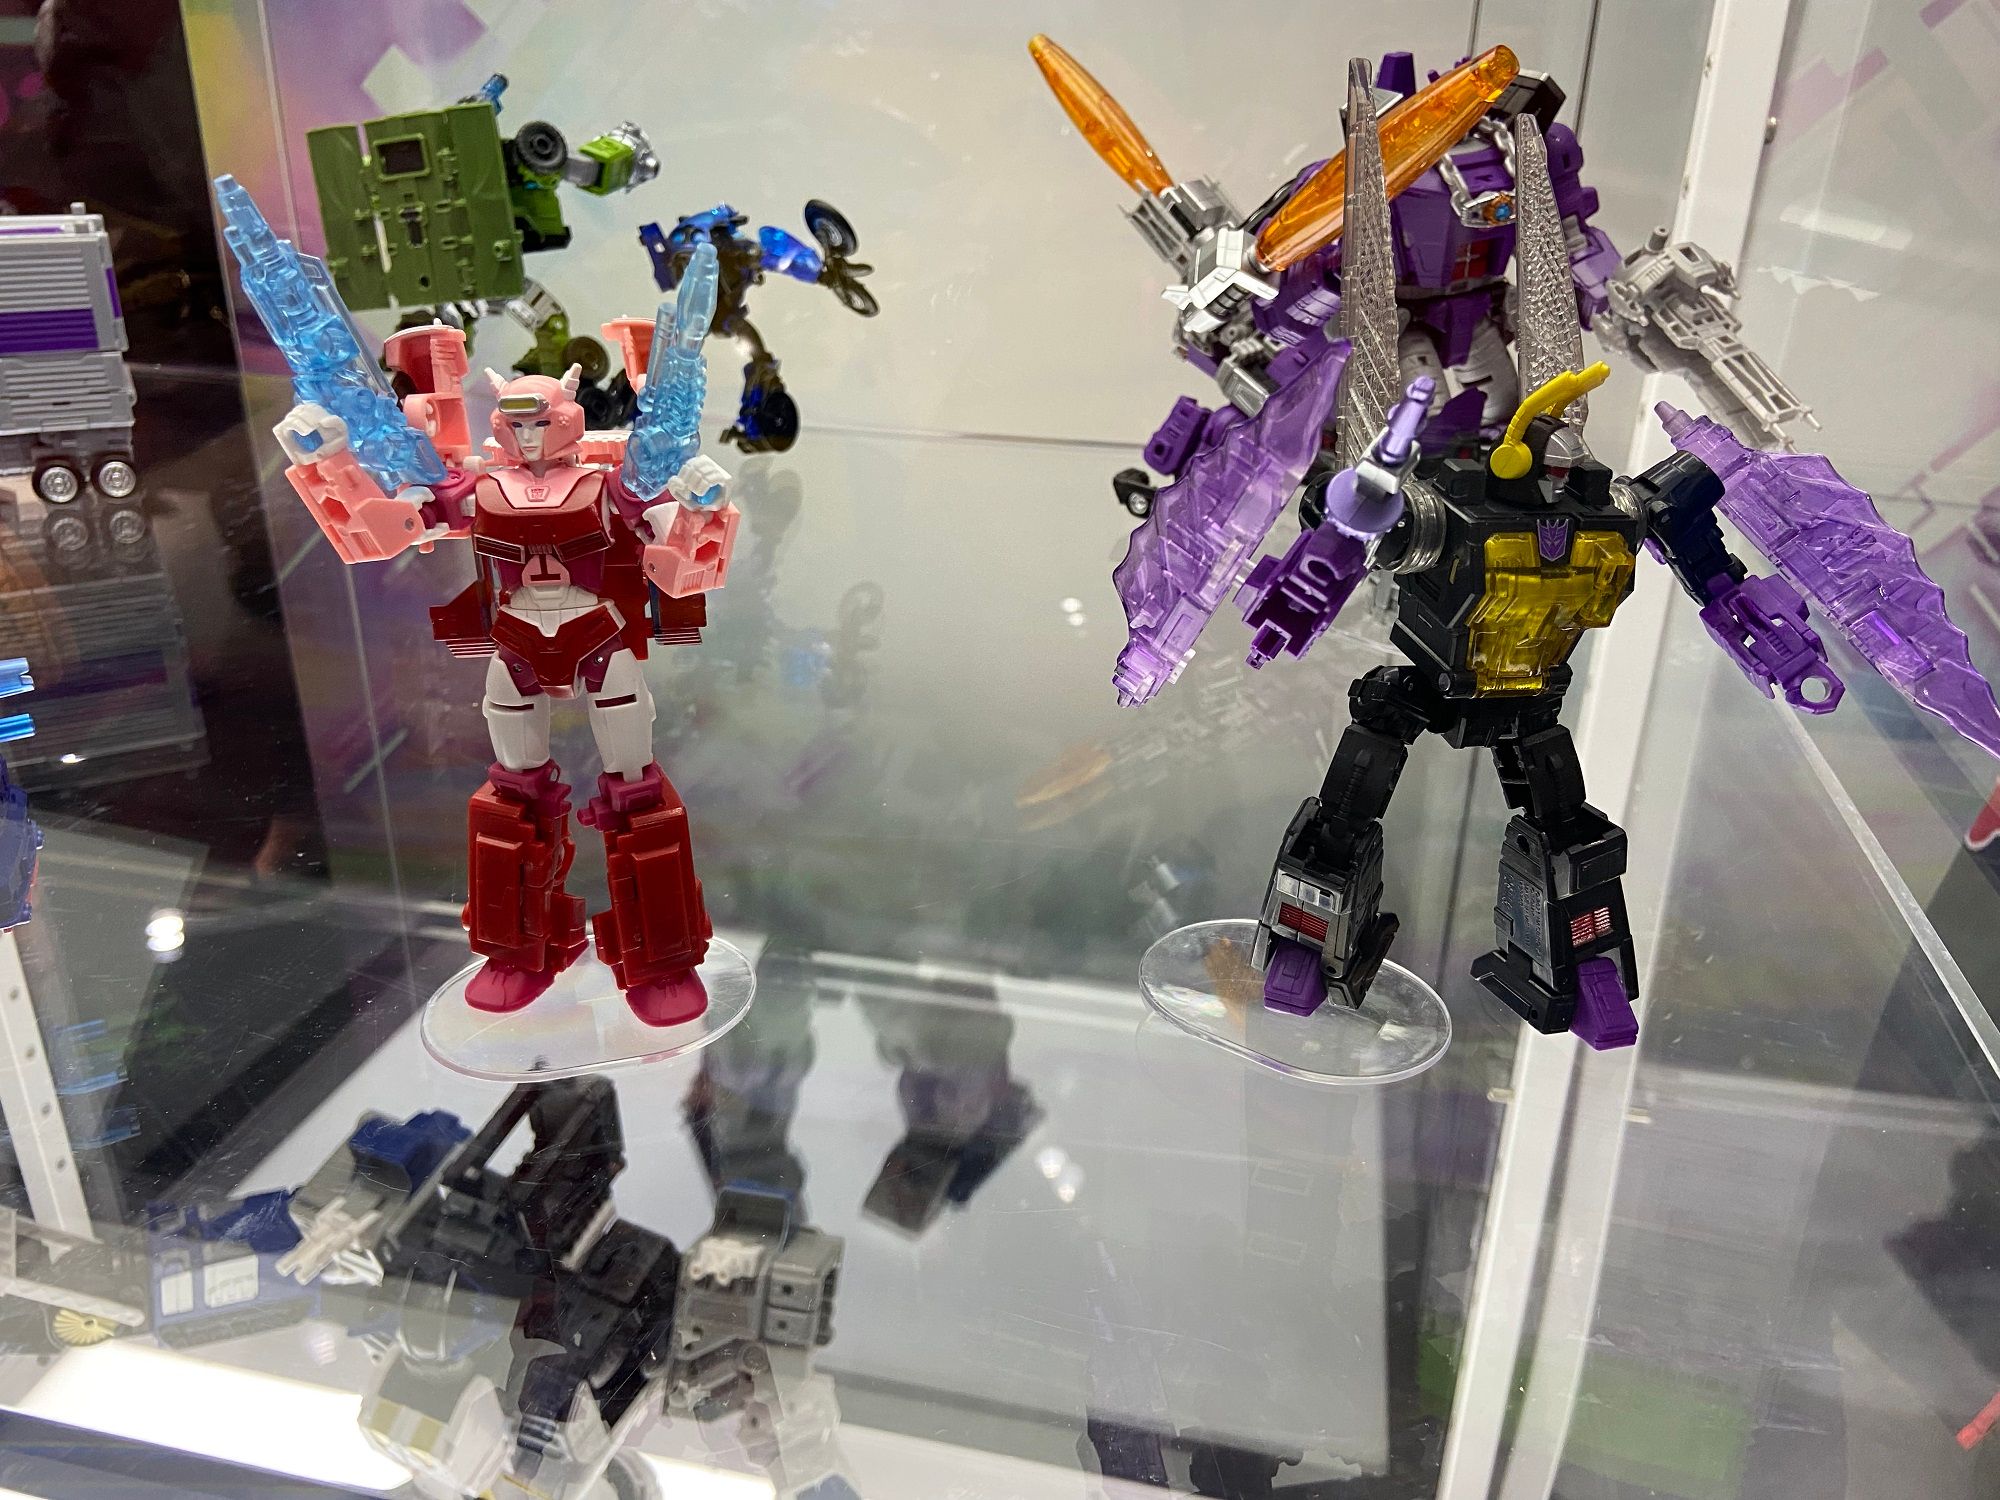 Autotbot and Decepticon toys at Hasbro Booth SDCC 2022